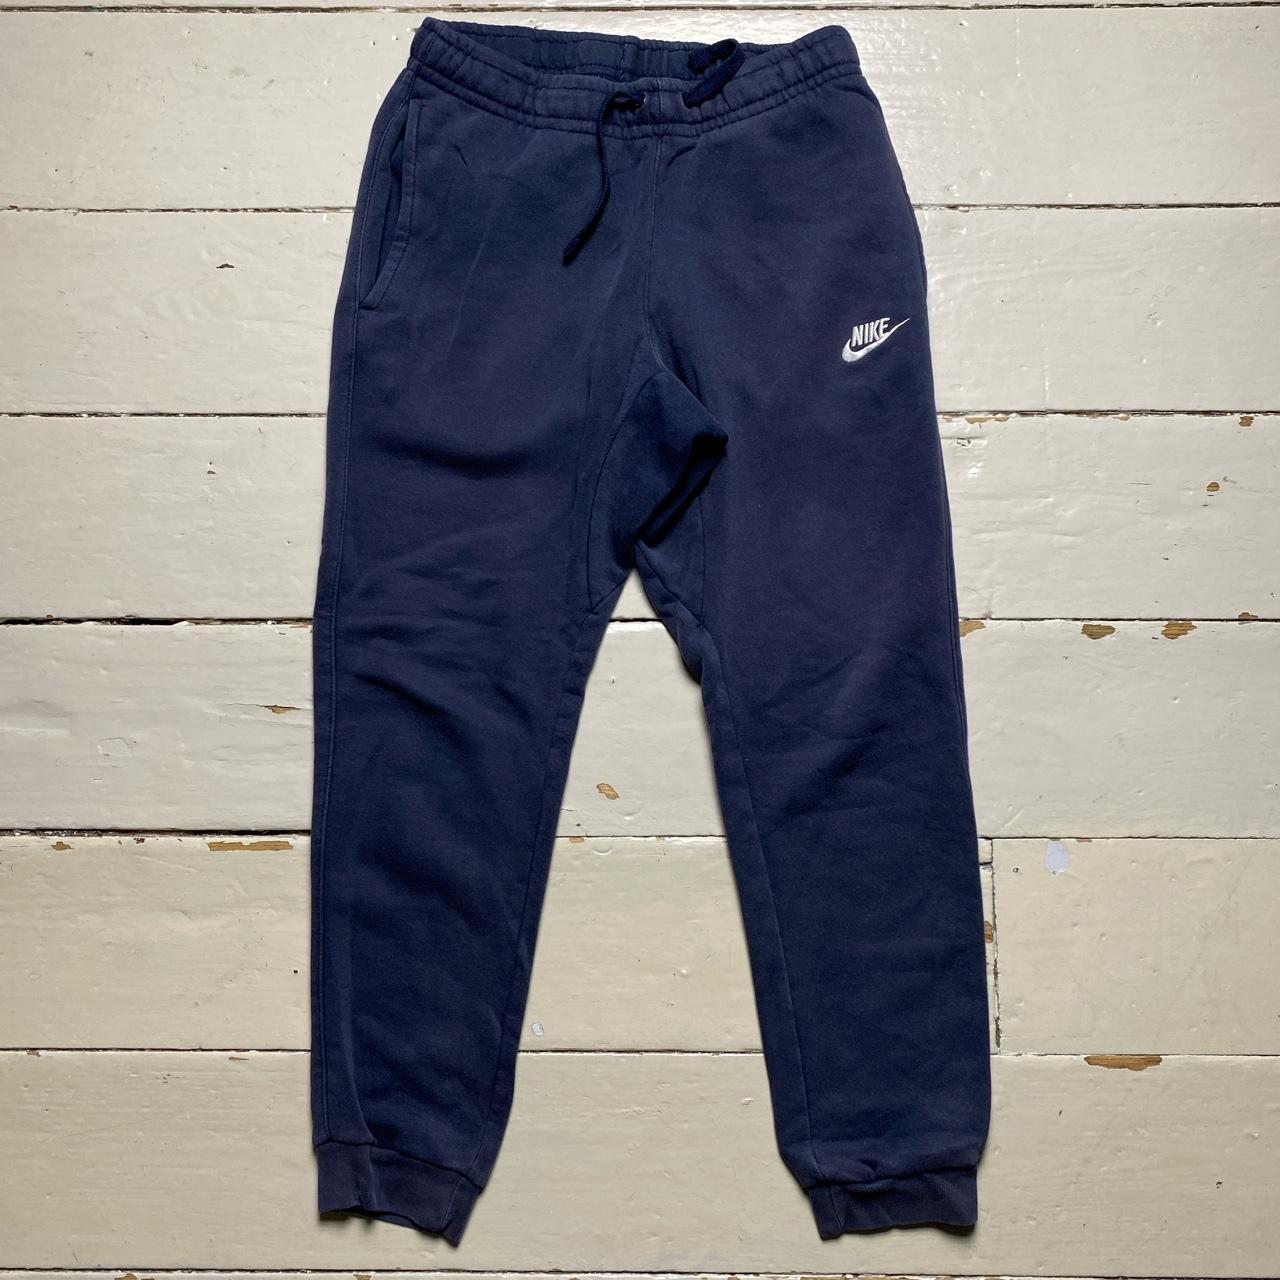 Nike Swoosh Navy and White Joggers